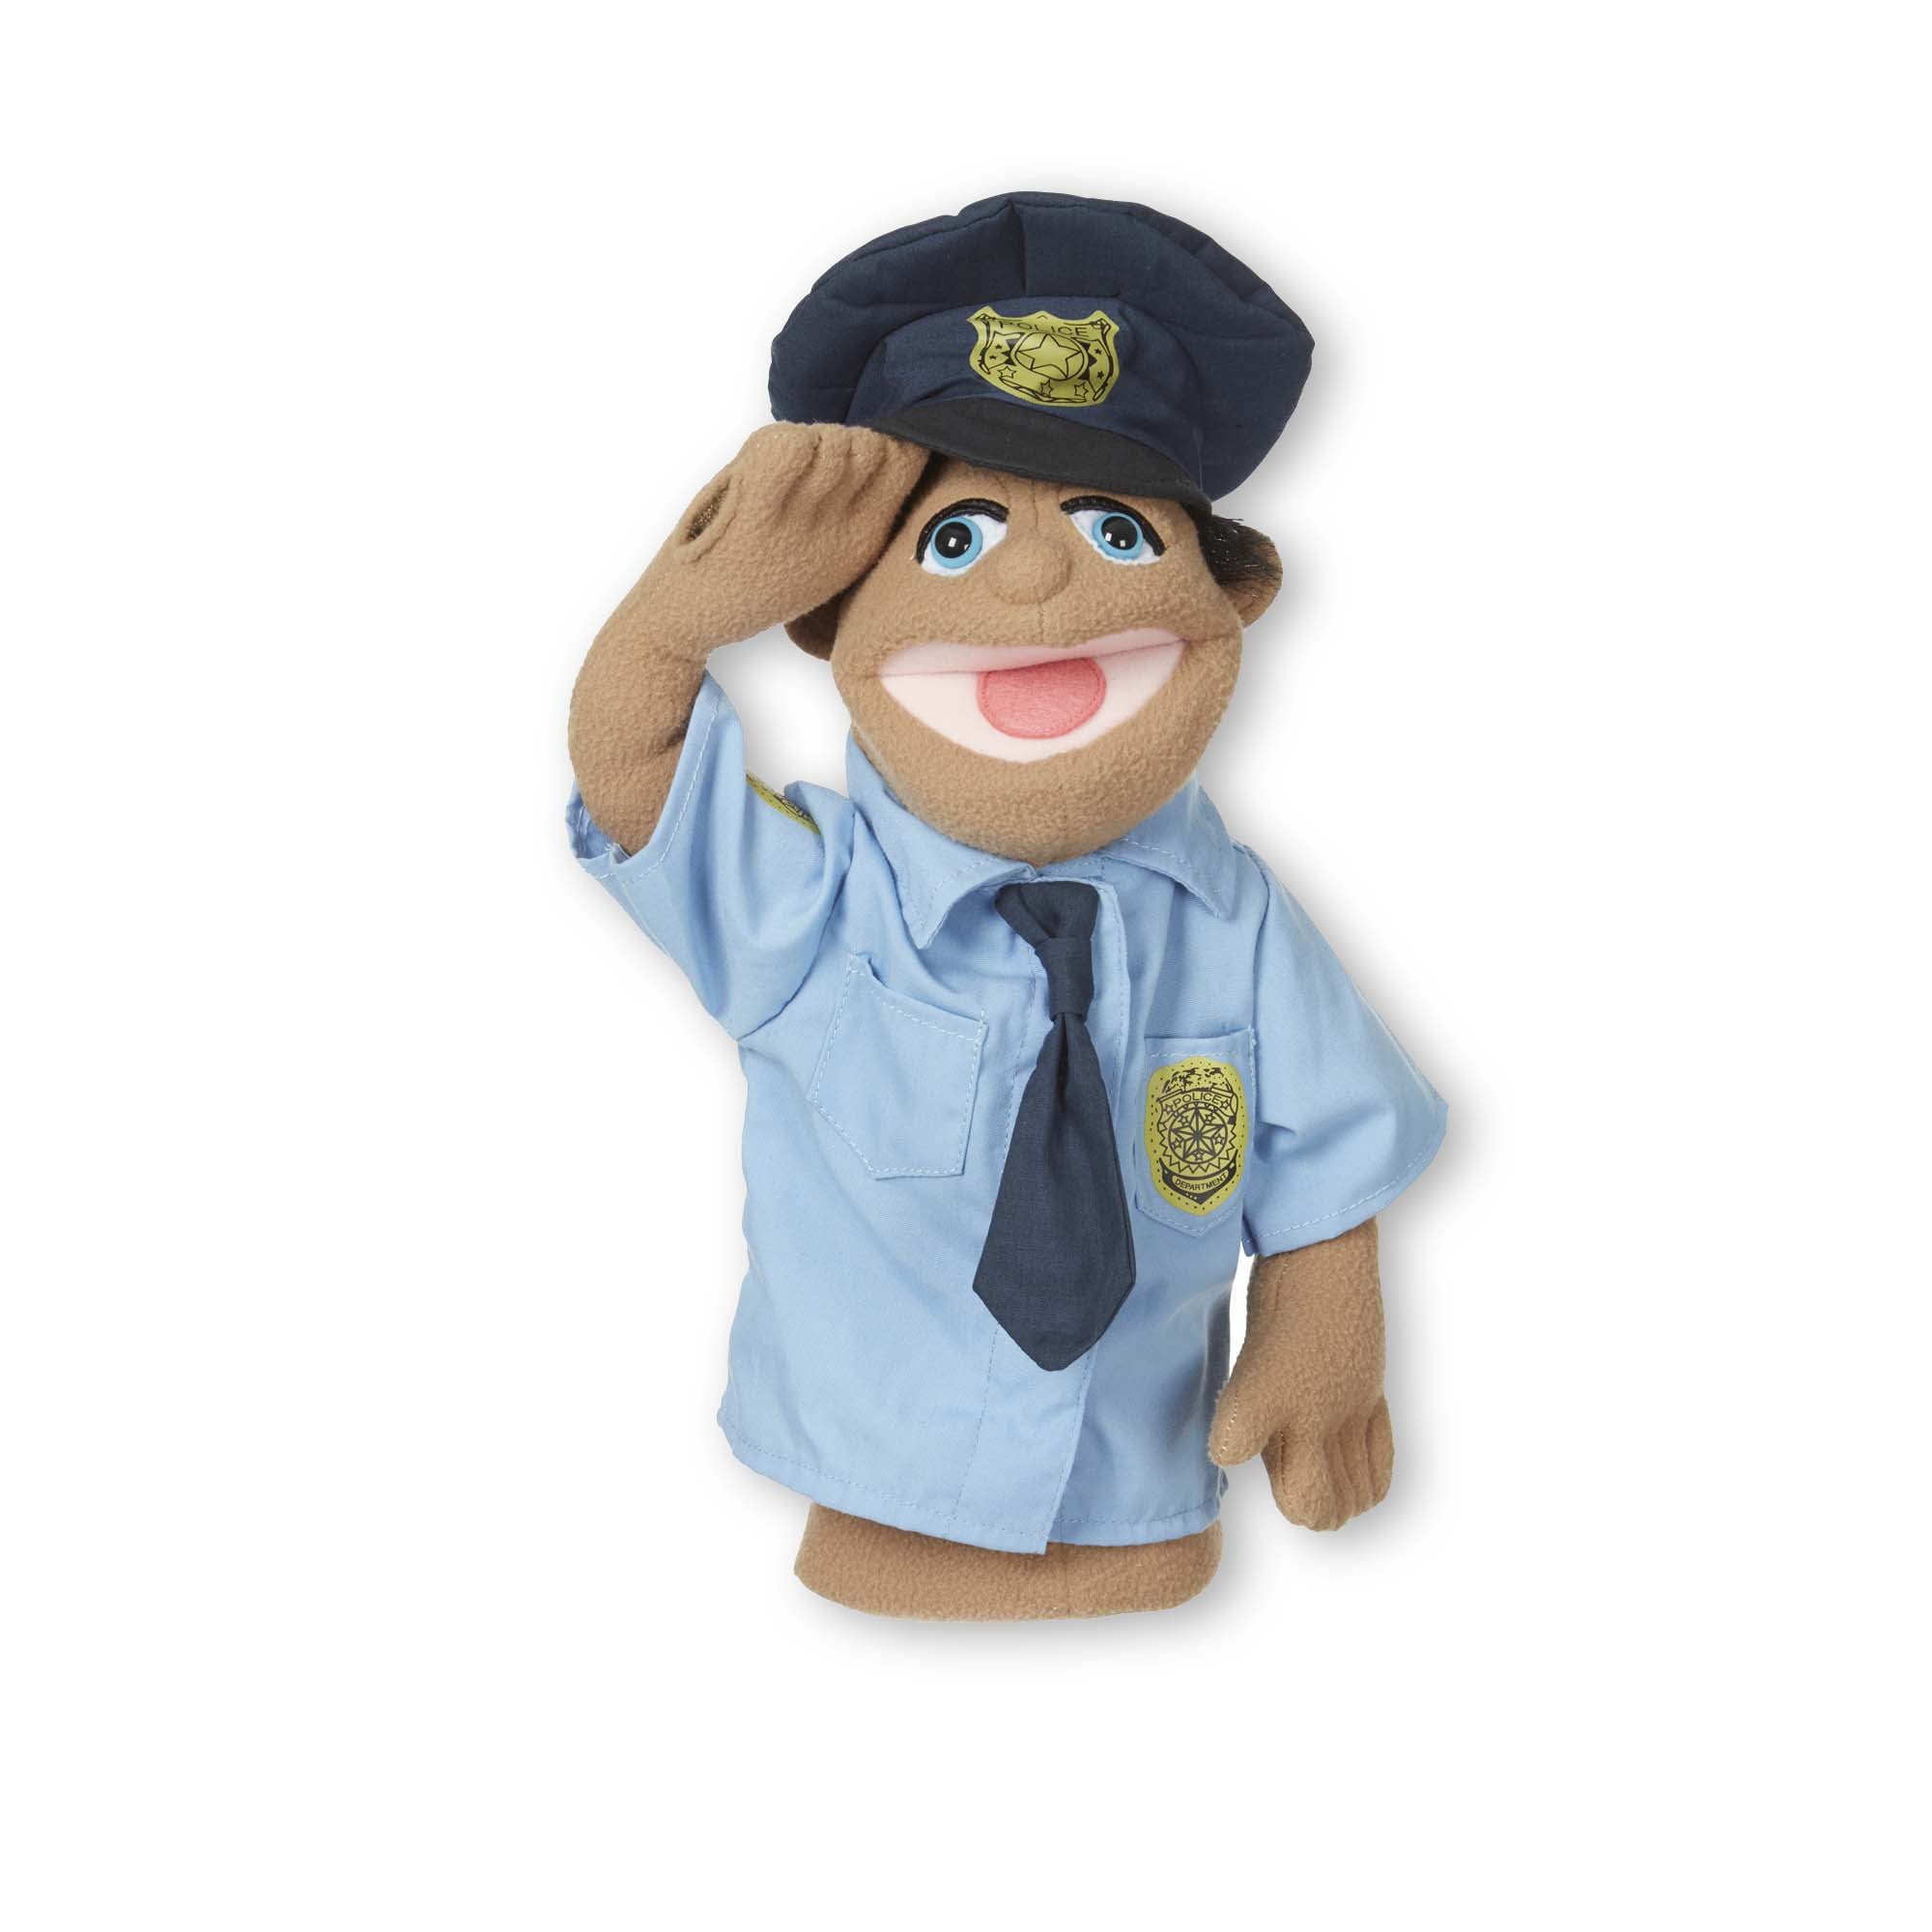 and Firefighter 9086 Doctor Set of 4 Melissa & Doug Jolly Helpers Hand Puppets - Construction Worker Police Officer 